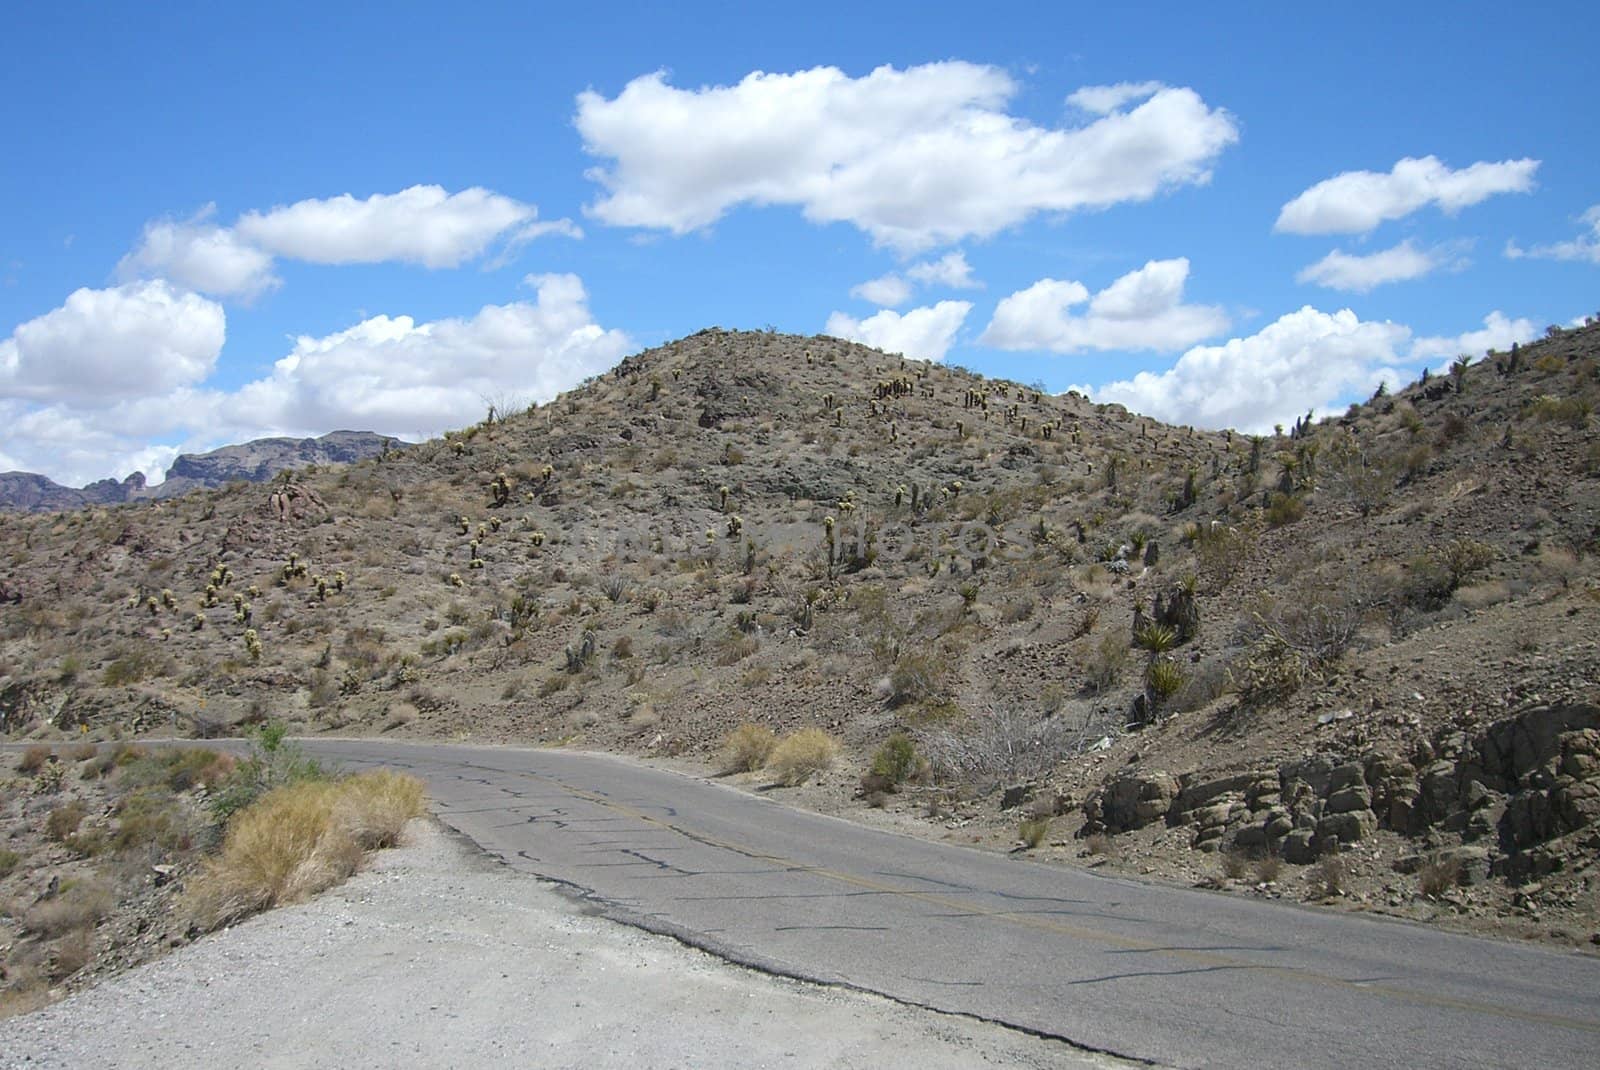 Mountain section of old Rt. 66 in Arizona